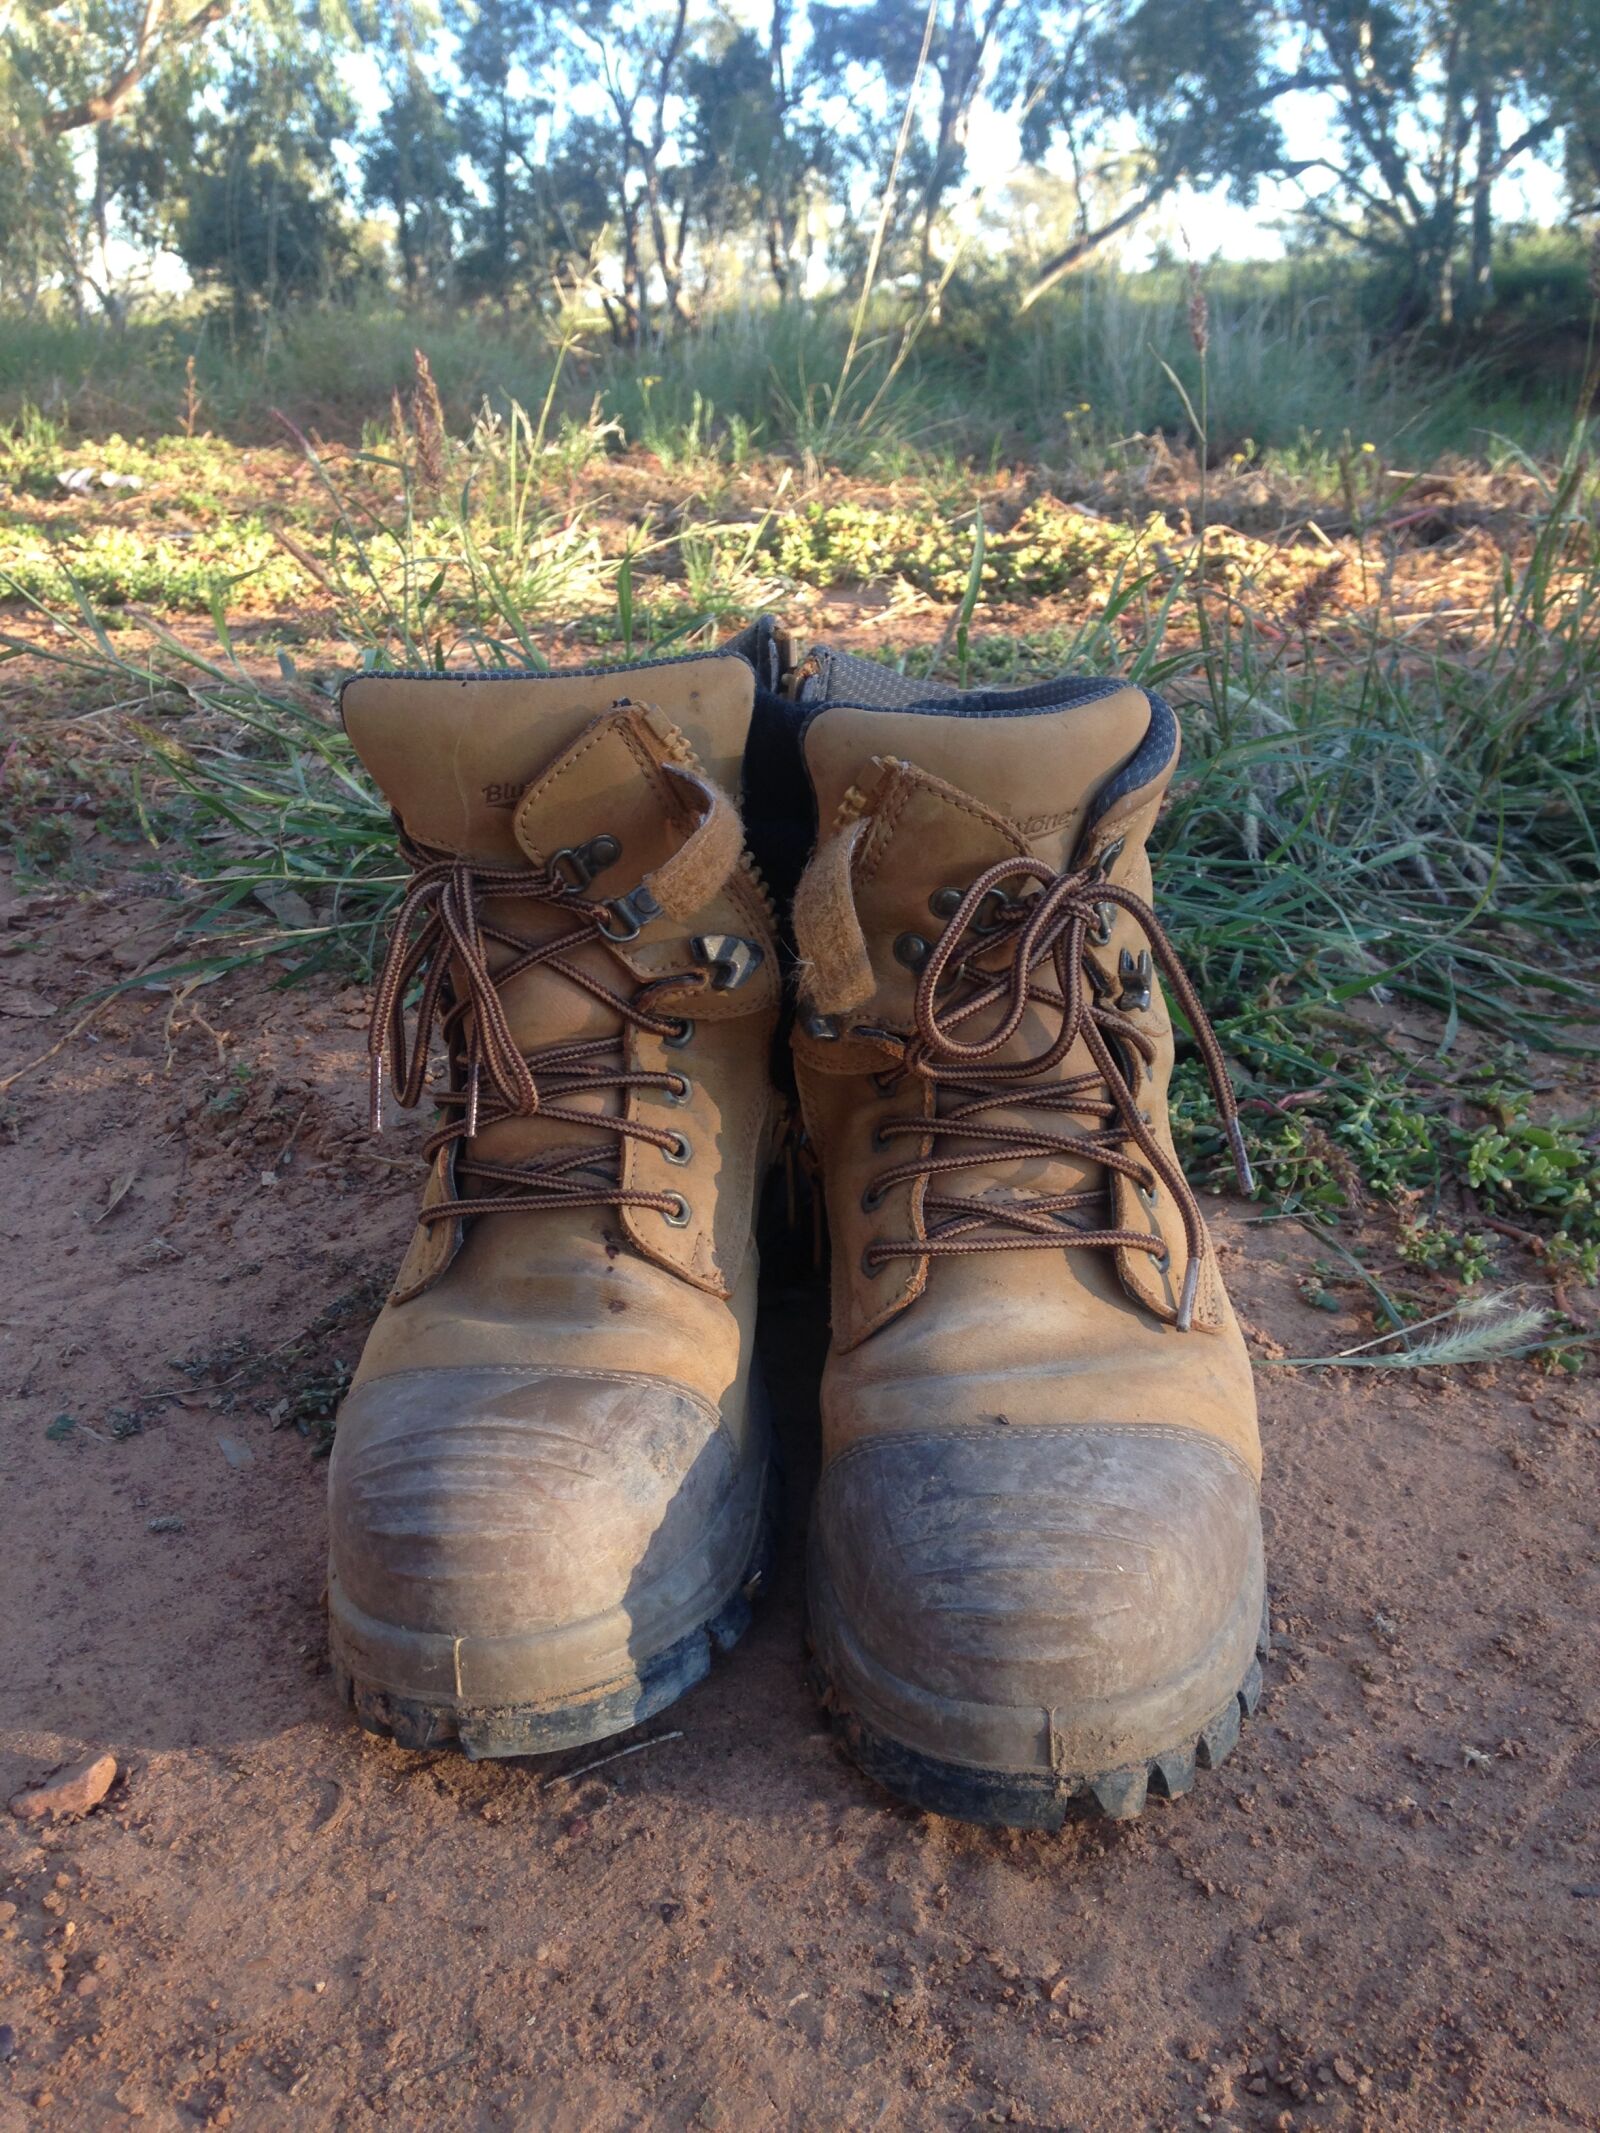 Apple iPhone 5c sample photo. Boots, feet, hiking, outback photography